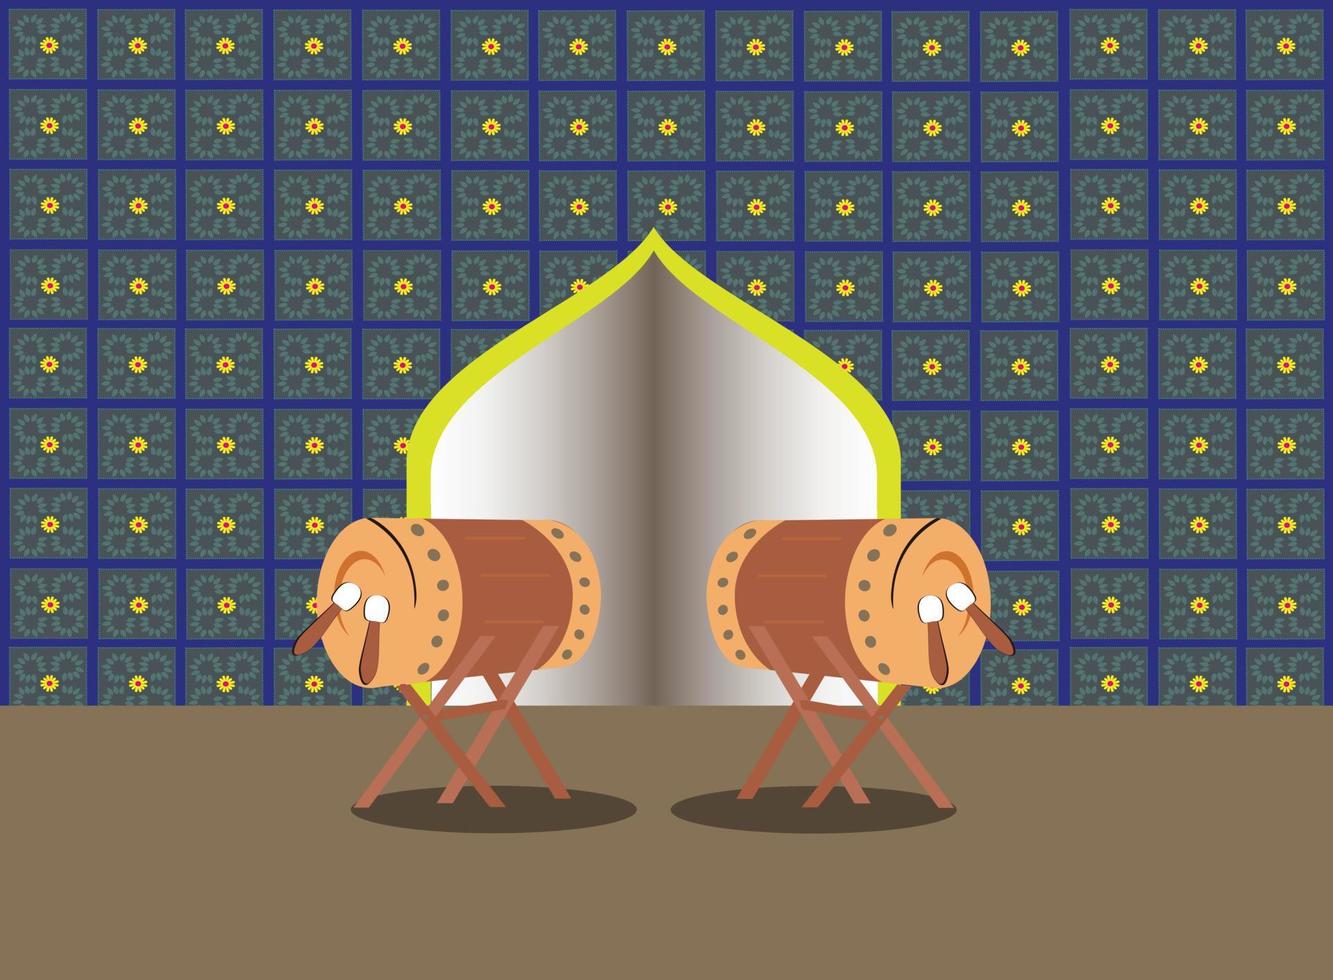 Flat illustration of mosque and drum design for Islamic holidays celebration. vector